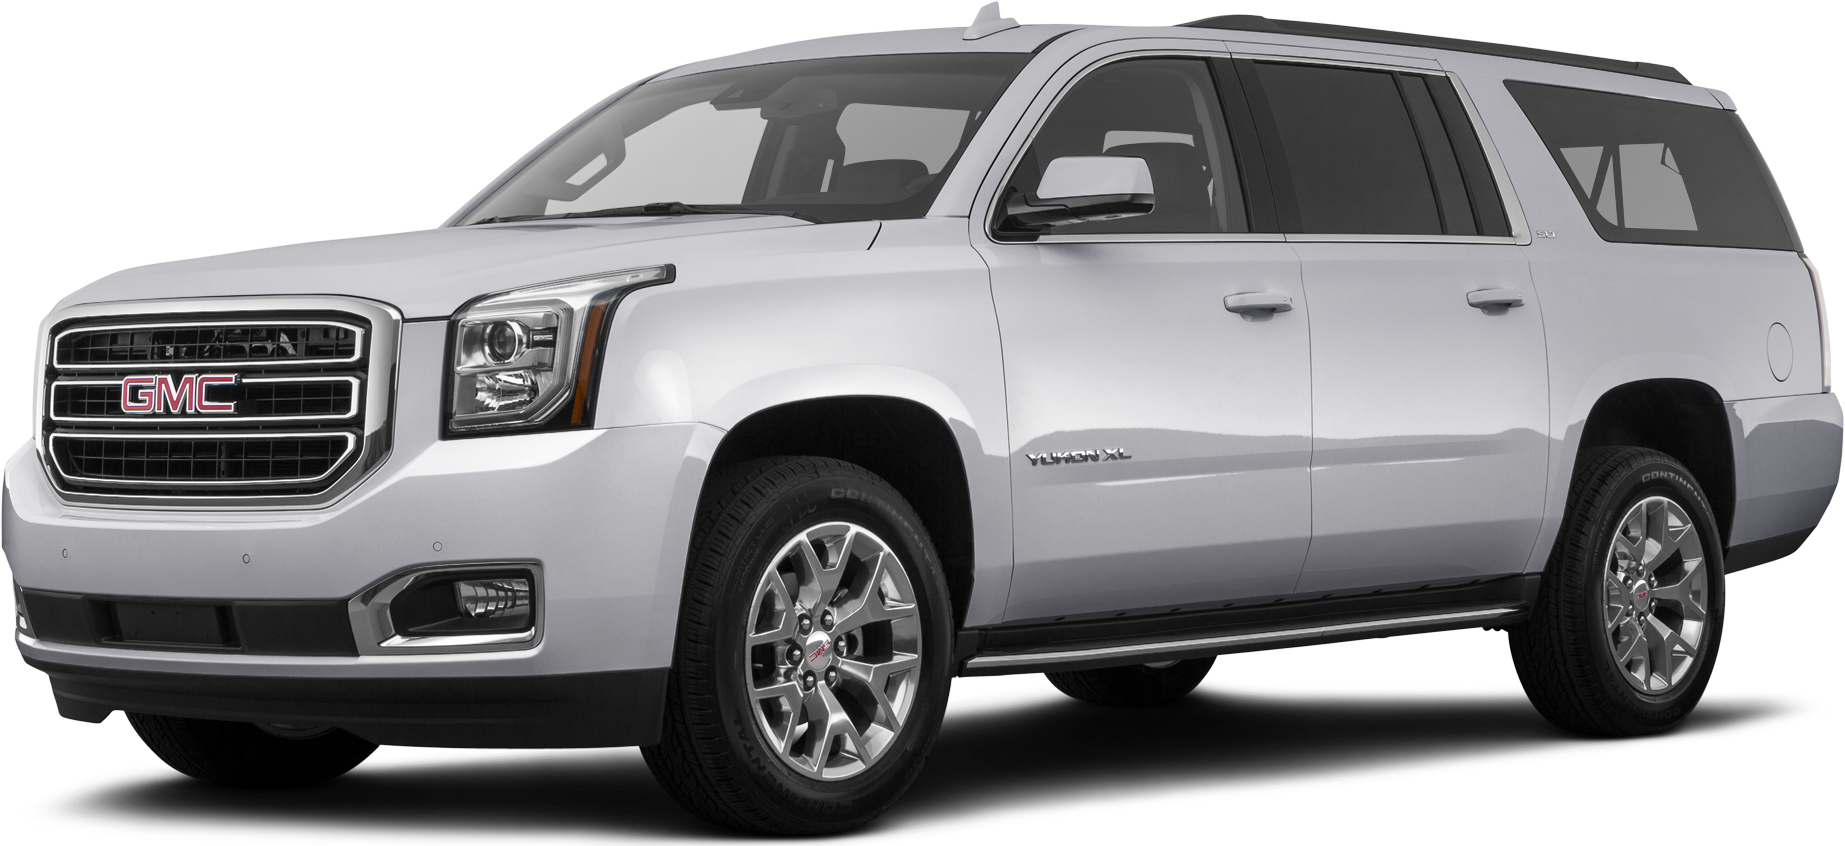 2019 Gmc Yukon Xl Price Value Ratings And Reviews Kelley Blue Book